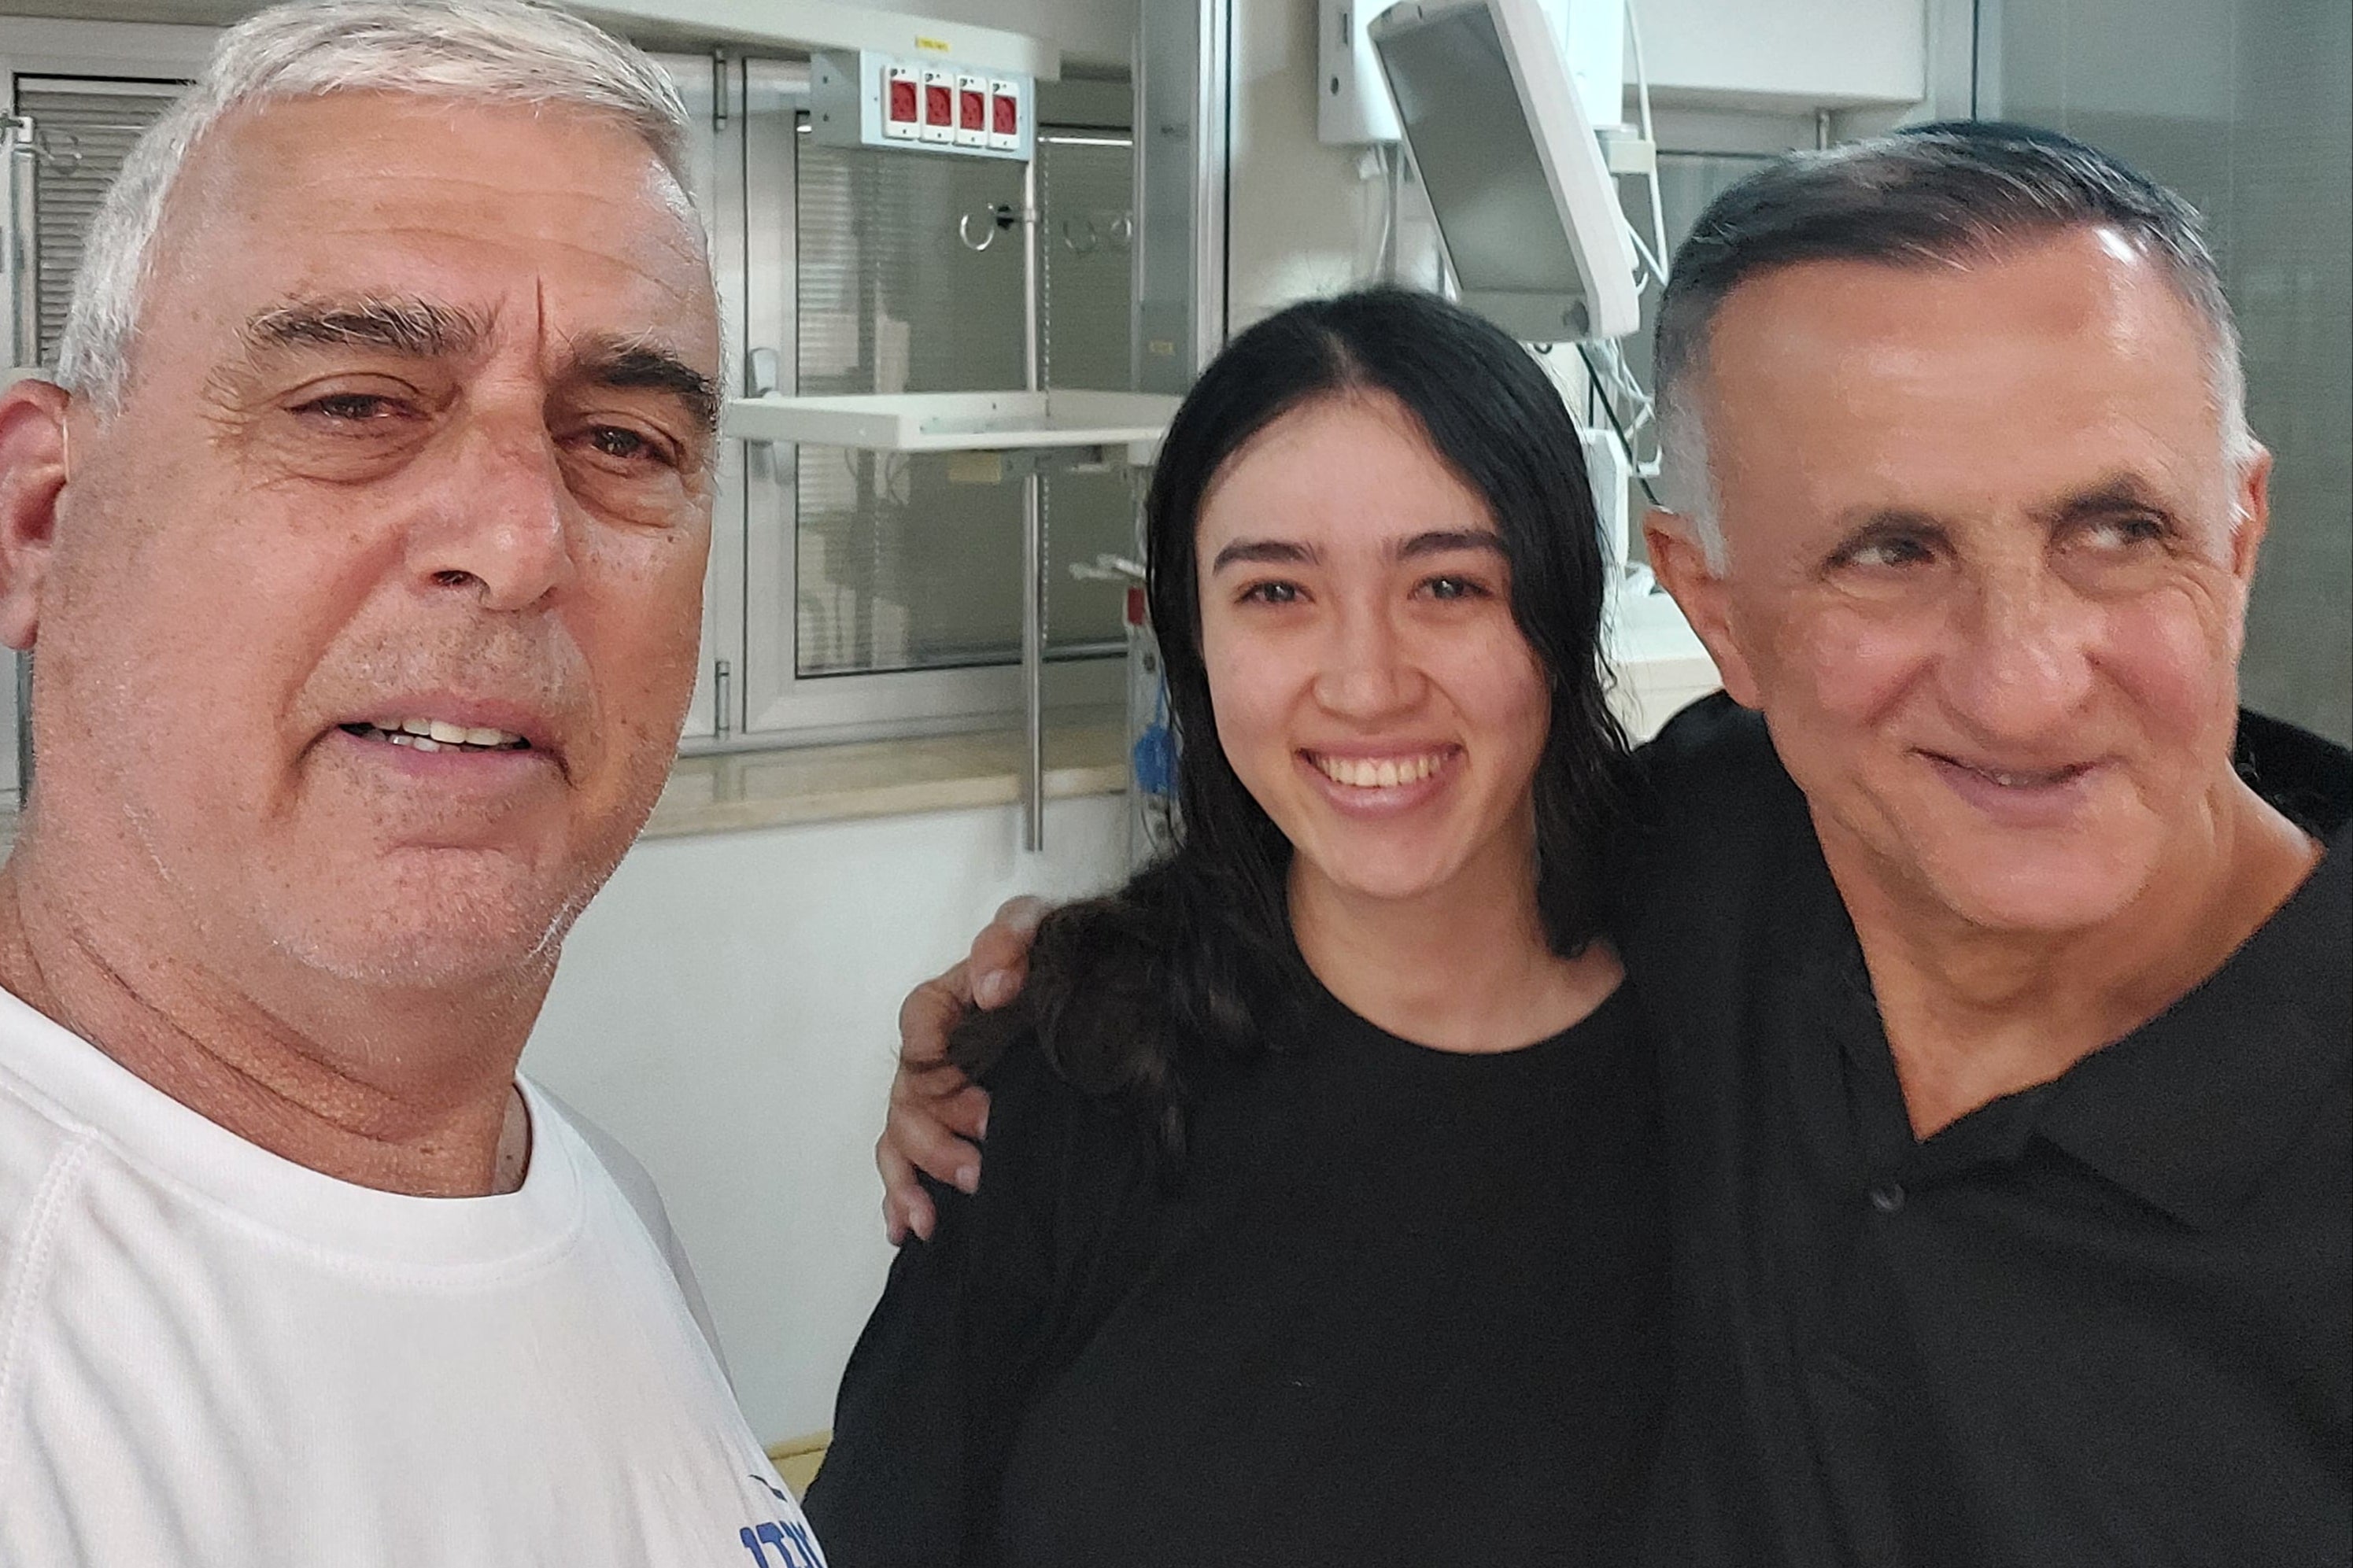 Noa Argamani stands with her father Yakov (right) and family friend Nir Givon in Ramat Gan, Israel